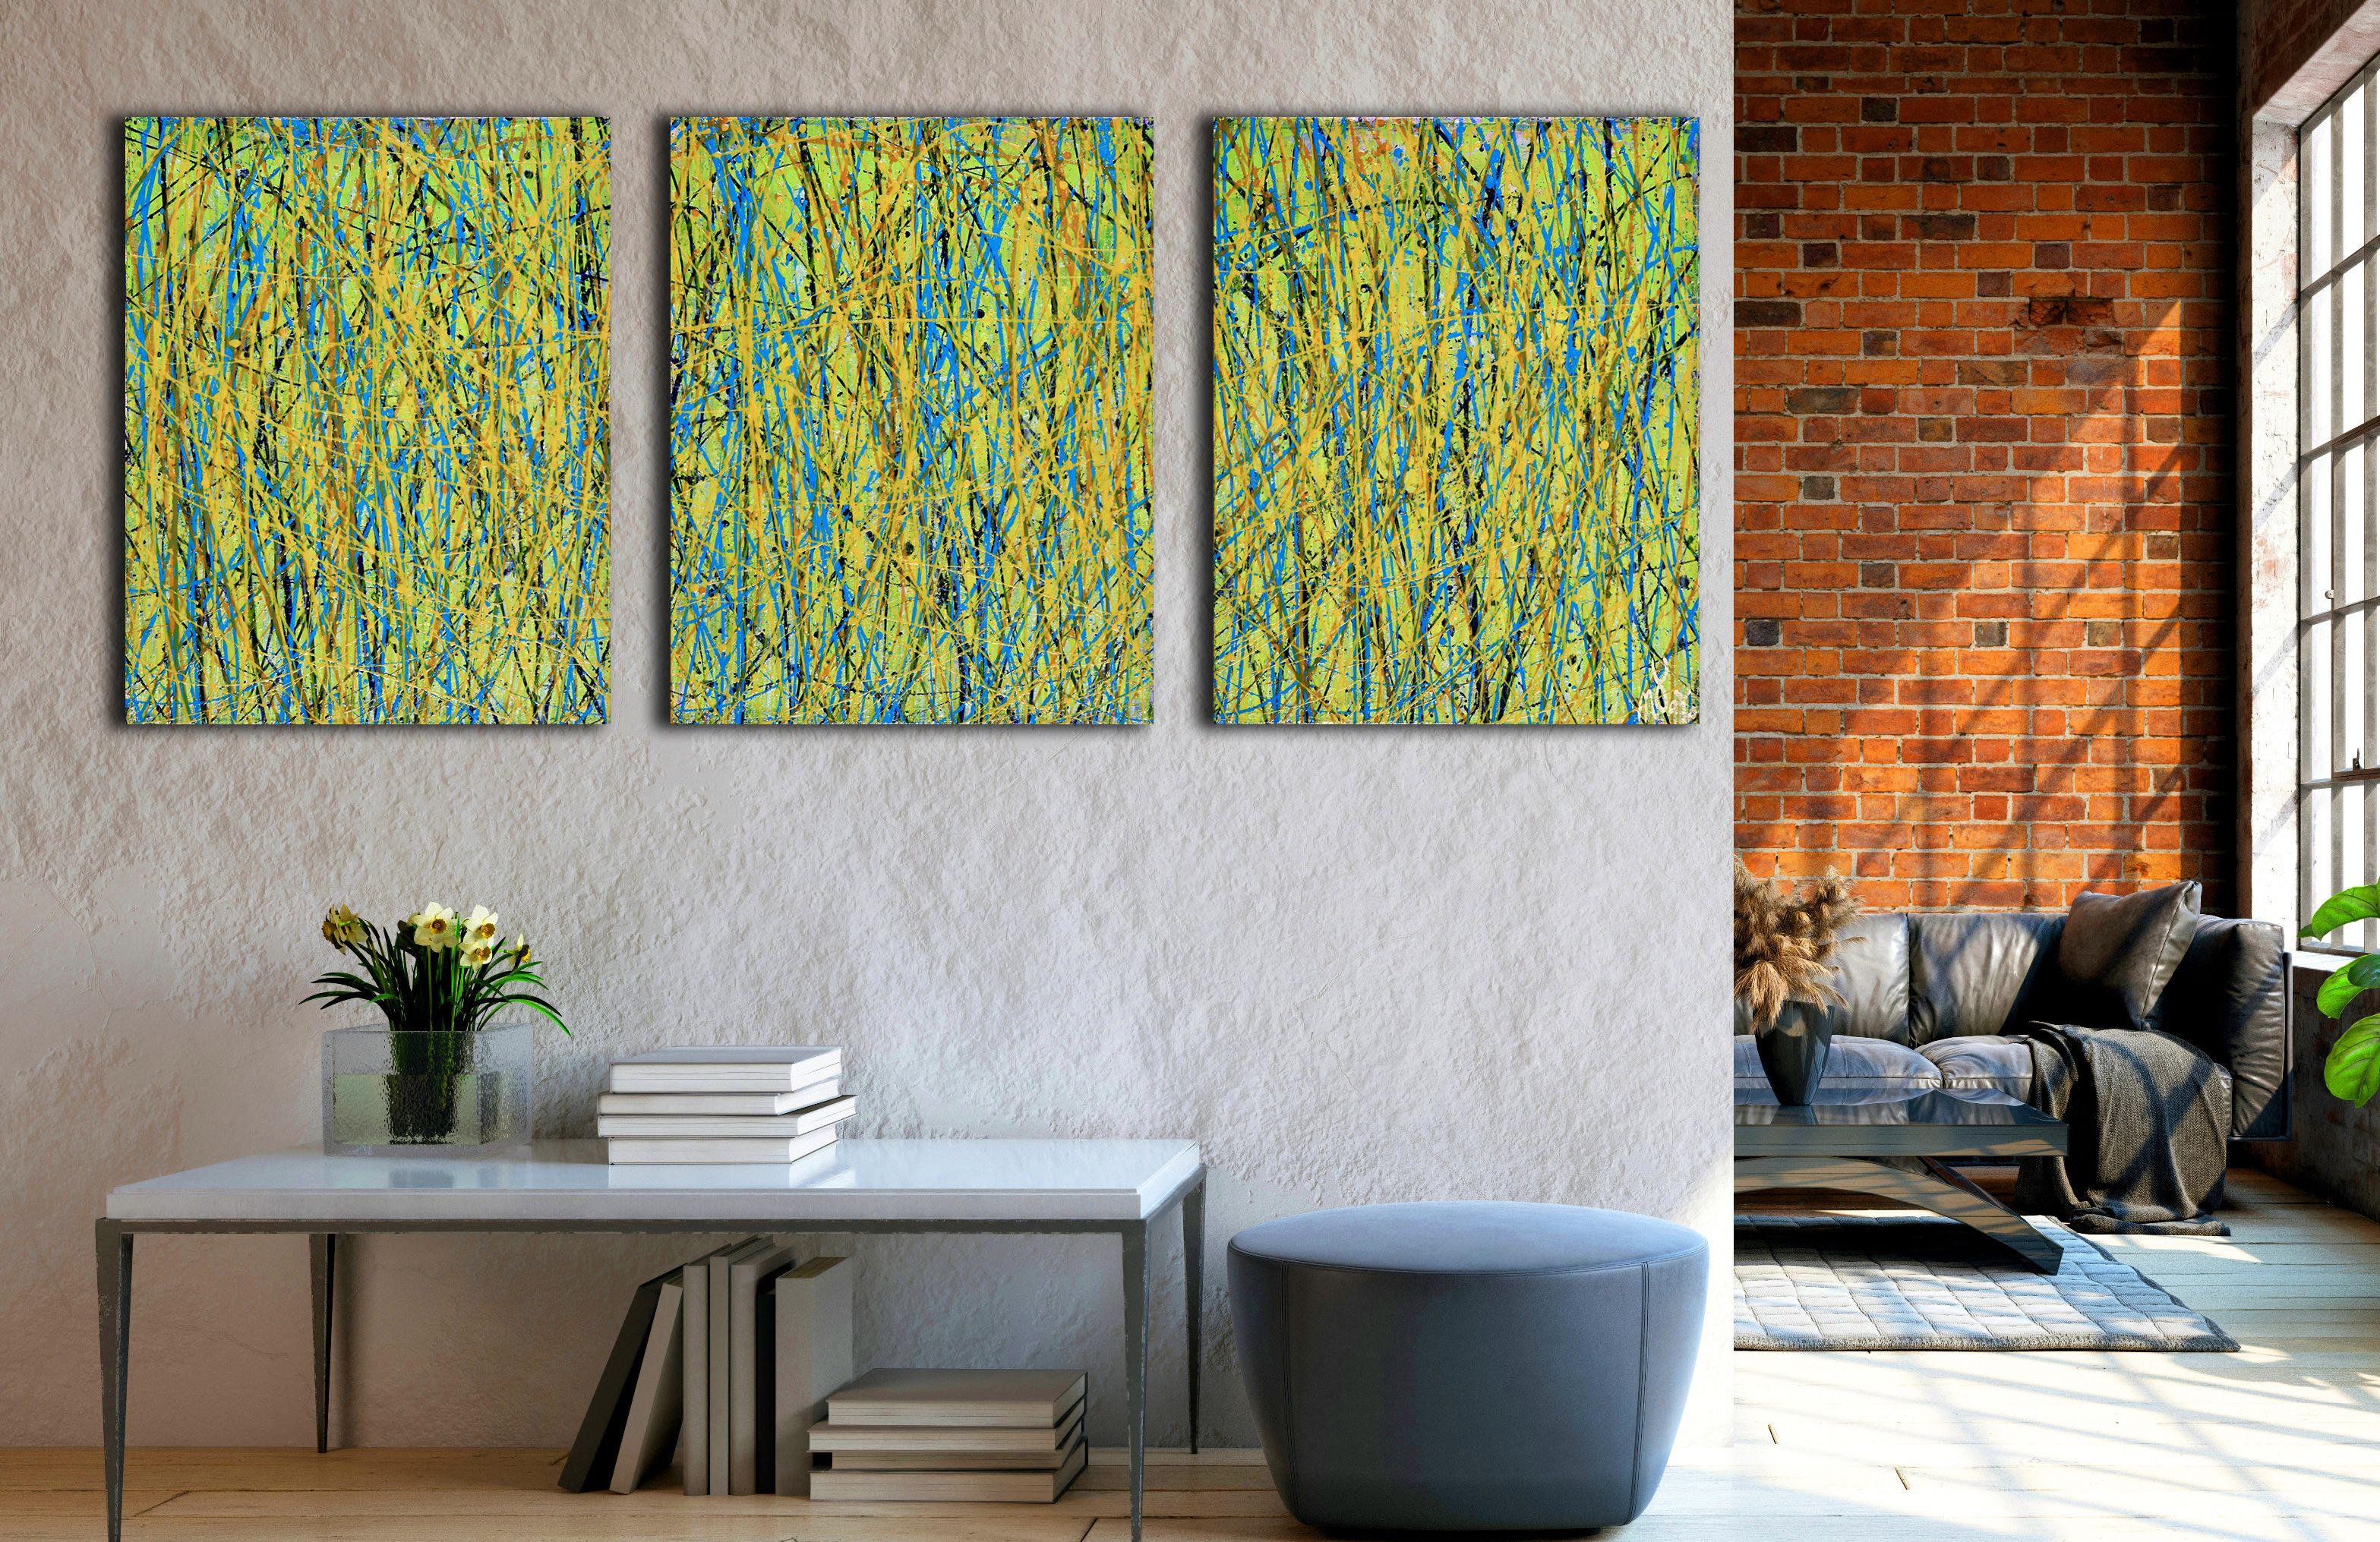 Three canvases16 W x 20 H x 1.5 in each.    Expressive contemporary modern abstract, bold, full of life, motion, gloss and shimmer! inspired by nature, shades of yellow, light blue, indigo and mint, all combined with mica particles. Ready to hang